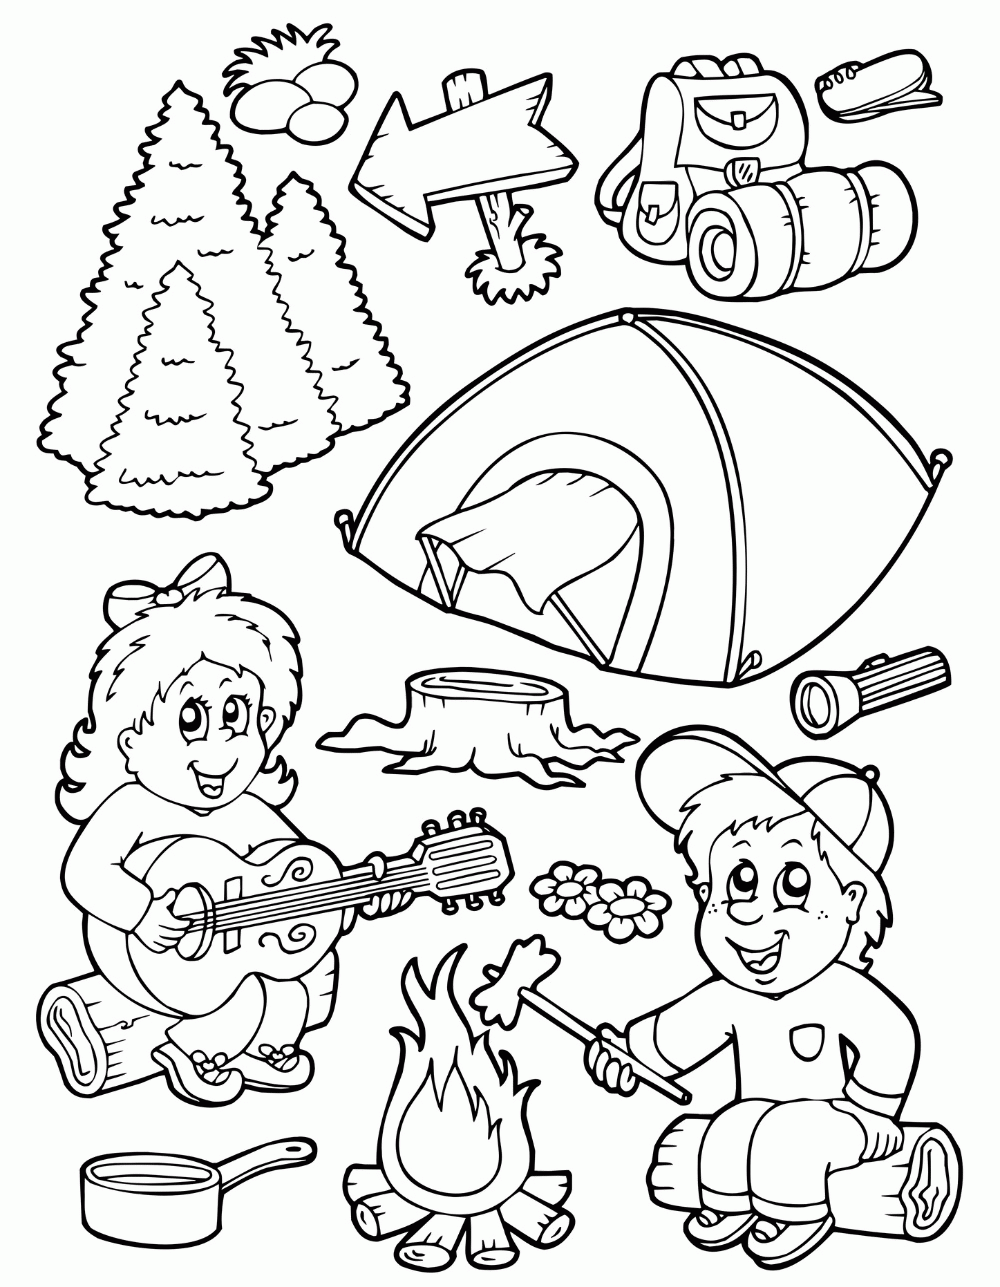 Camping coloring pages for kids